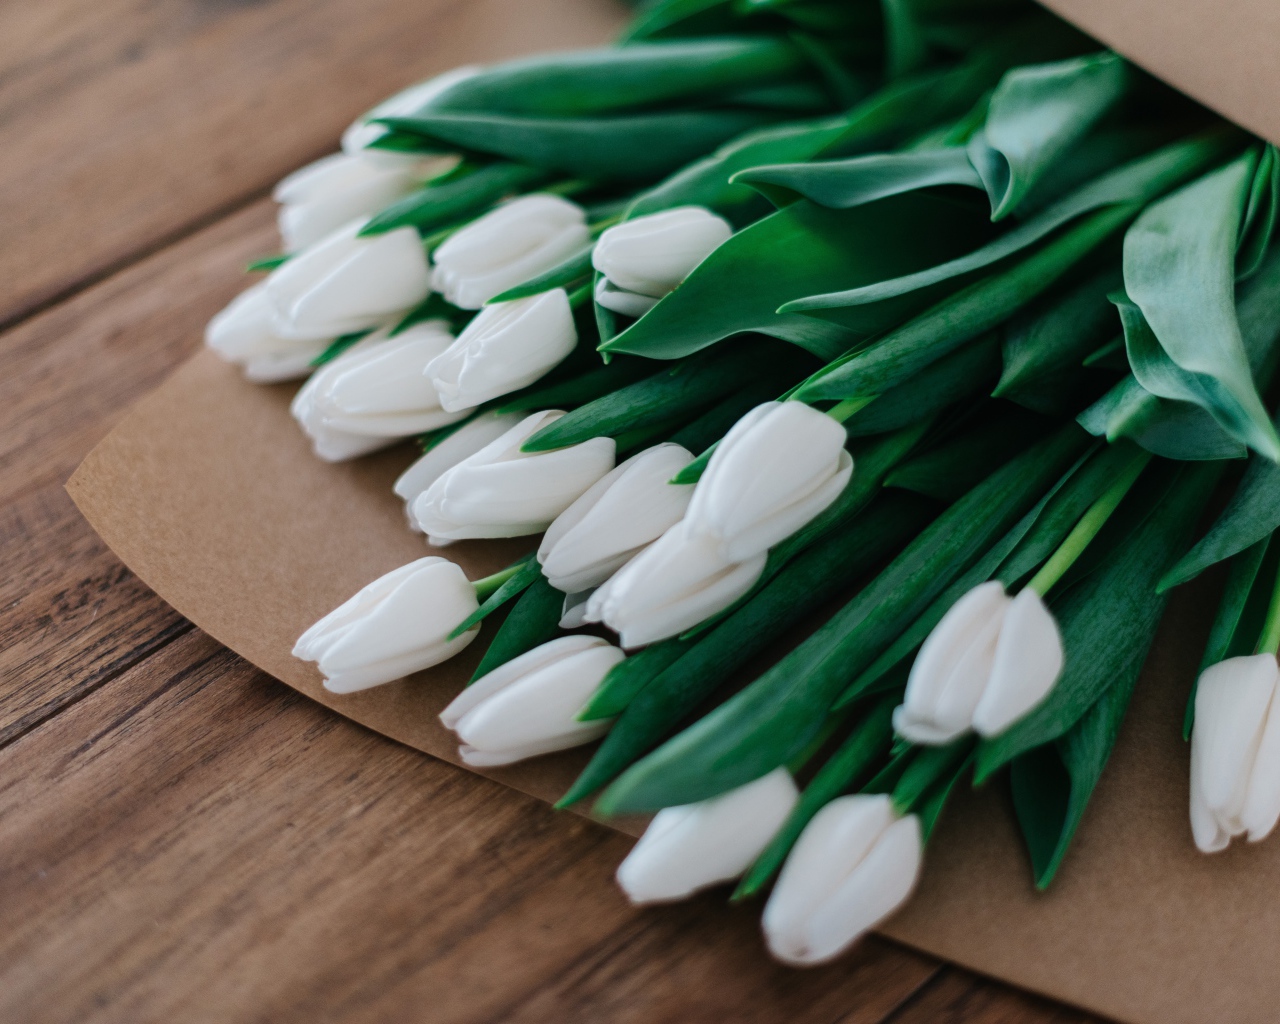 Large bouquet of white tulips in a paper bag